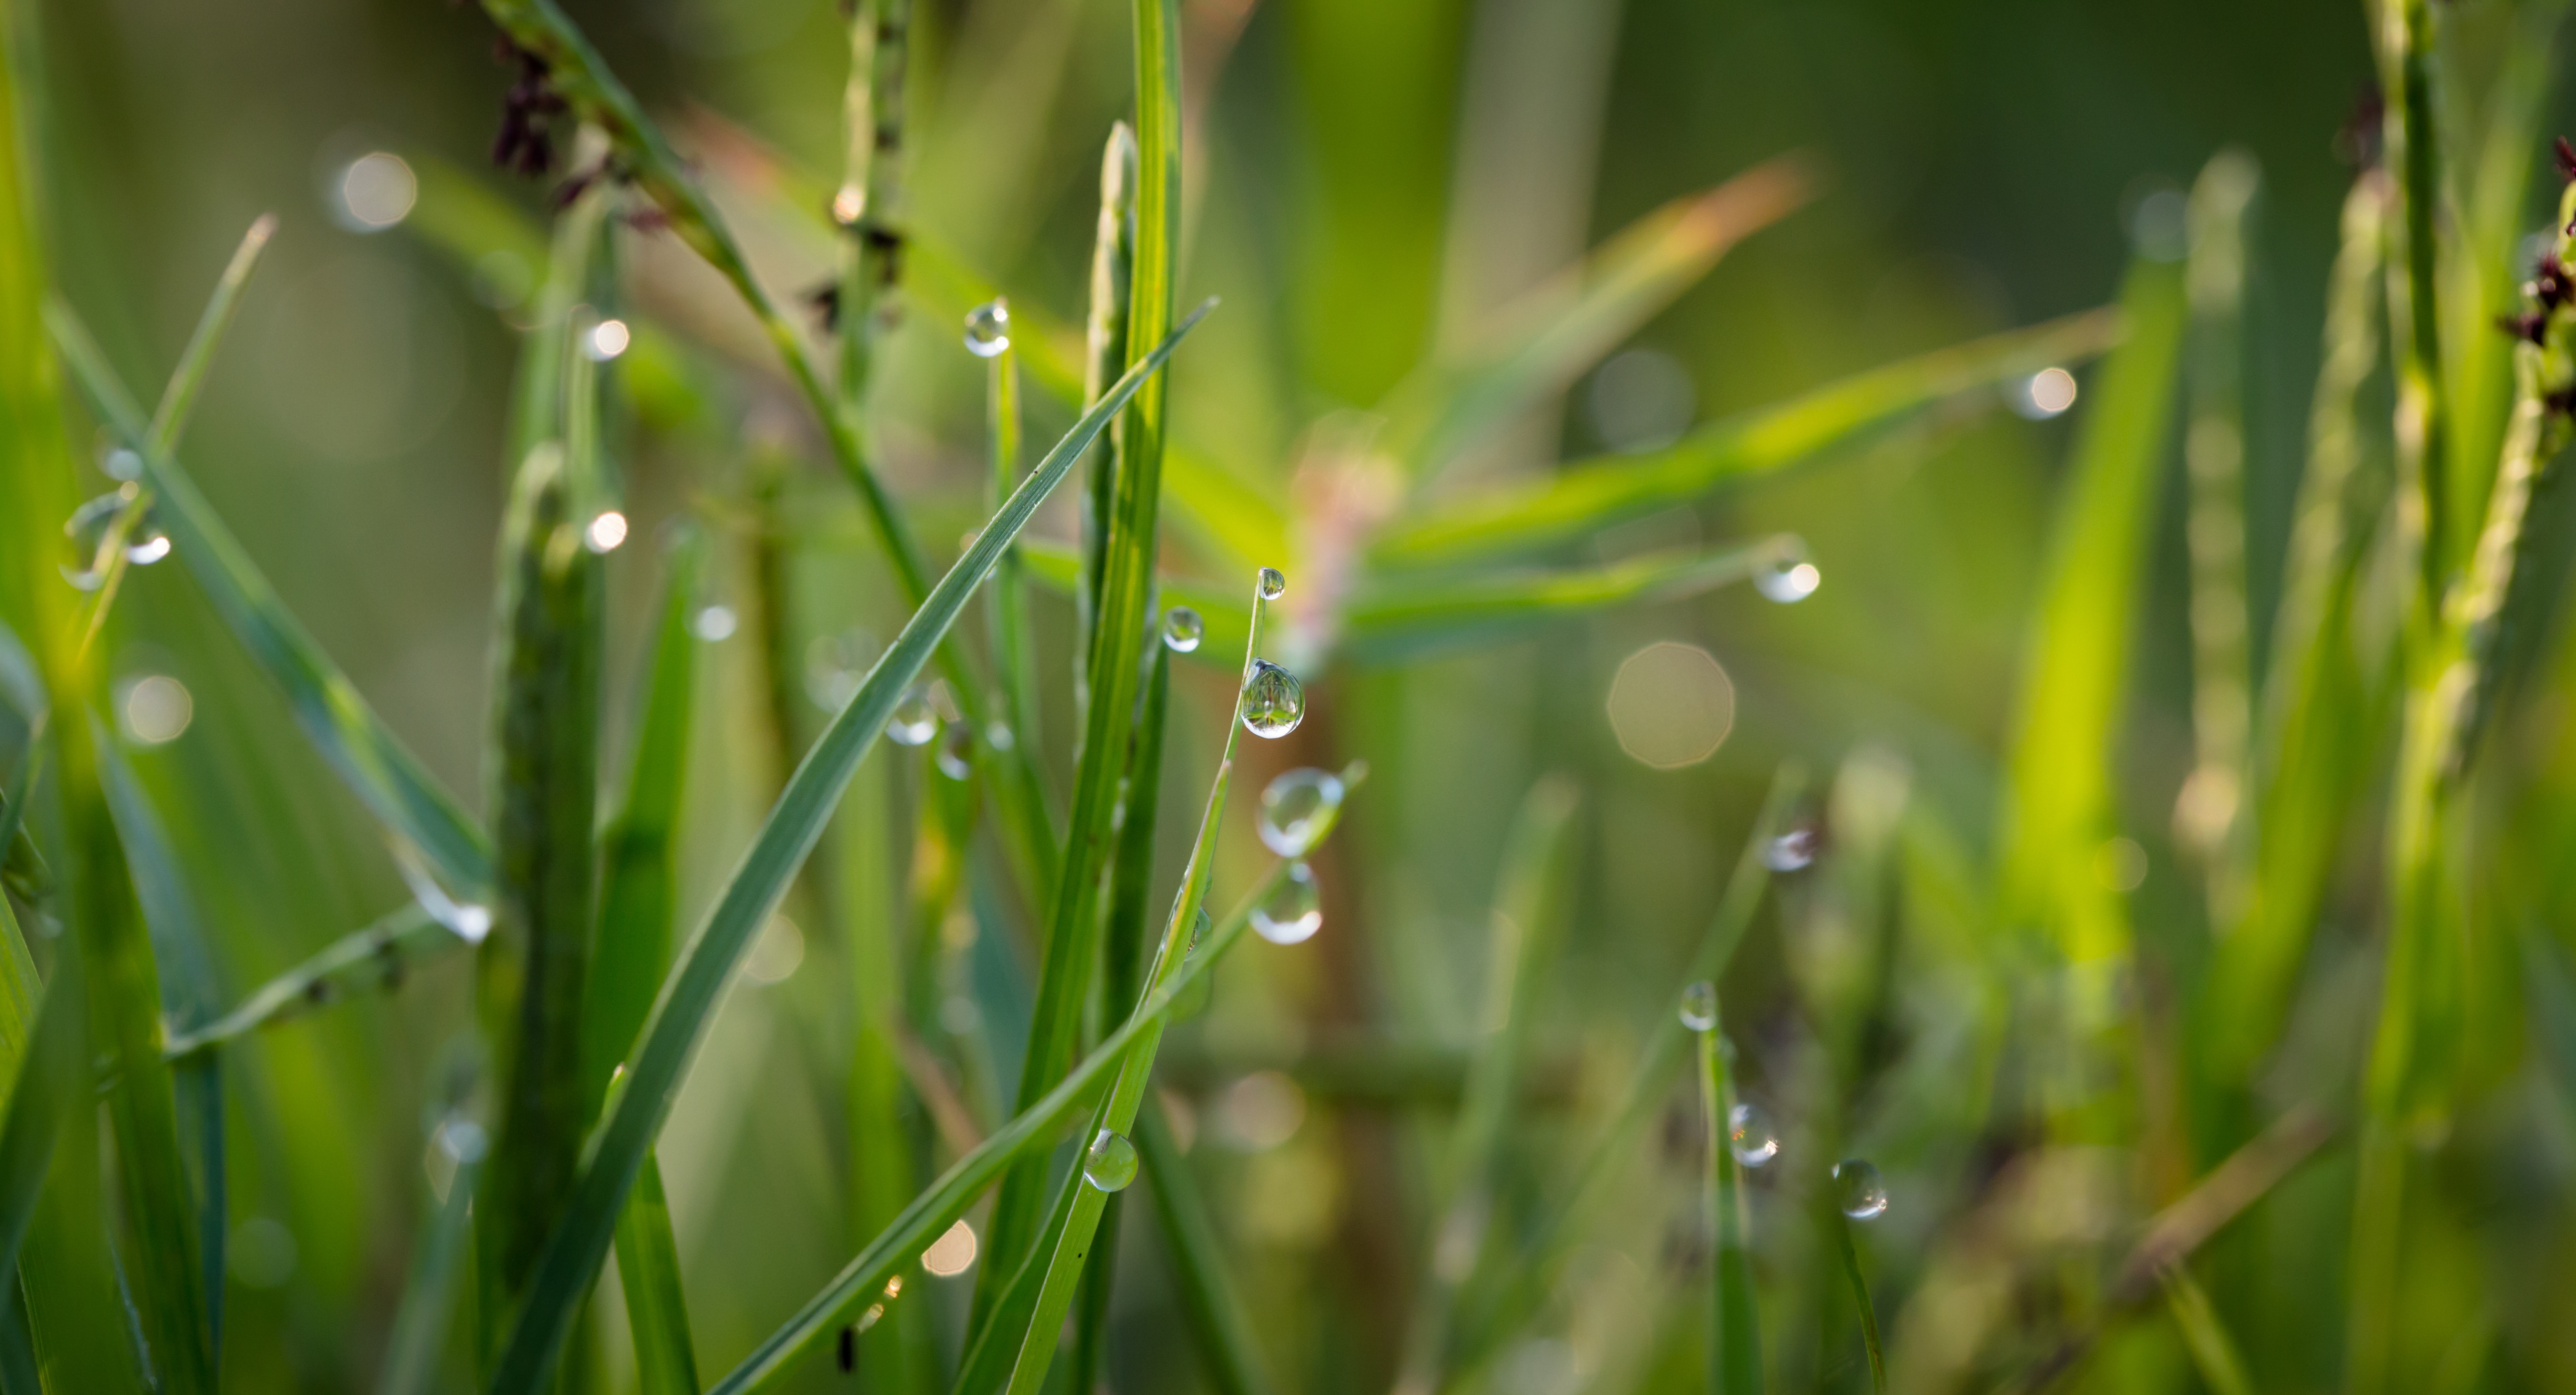 dew drops on green grass in close photography